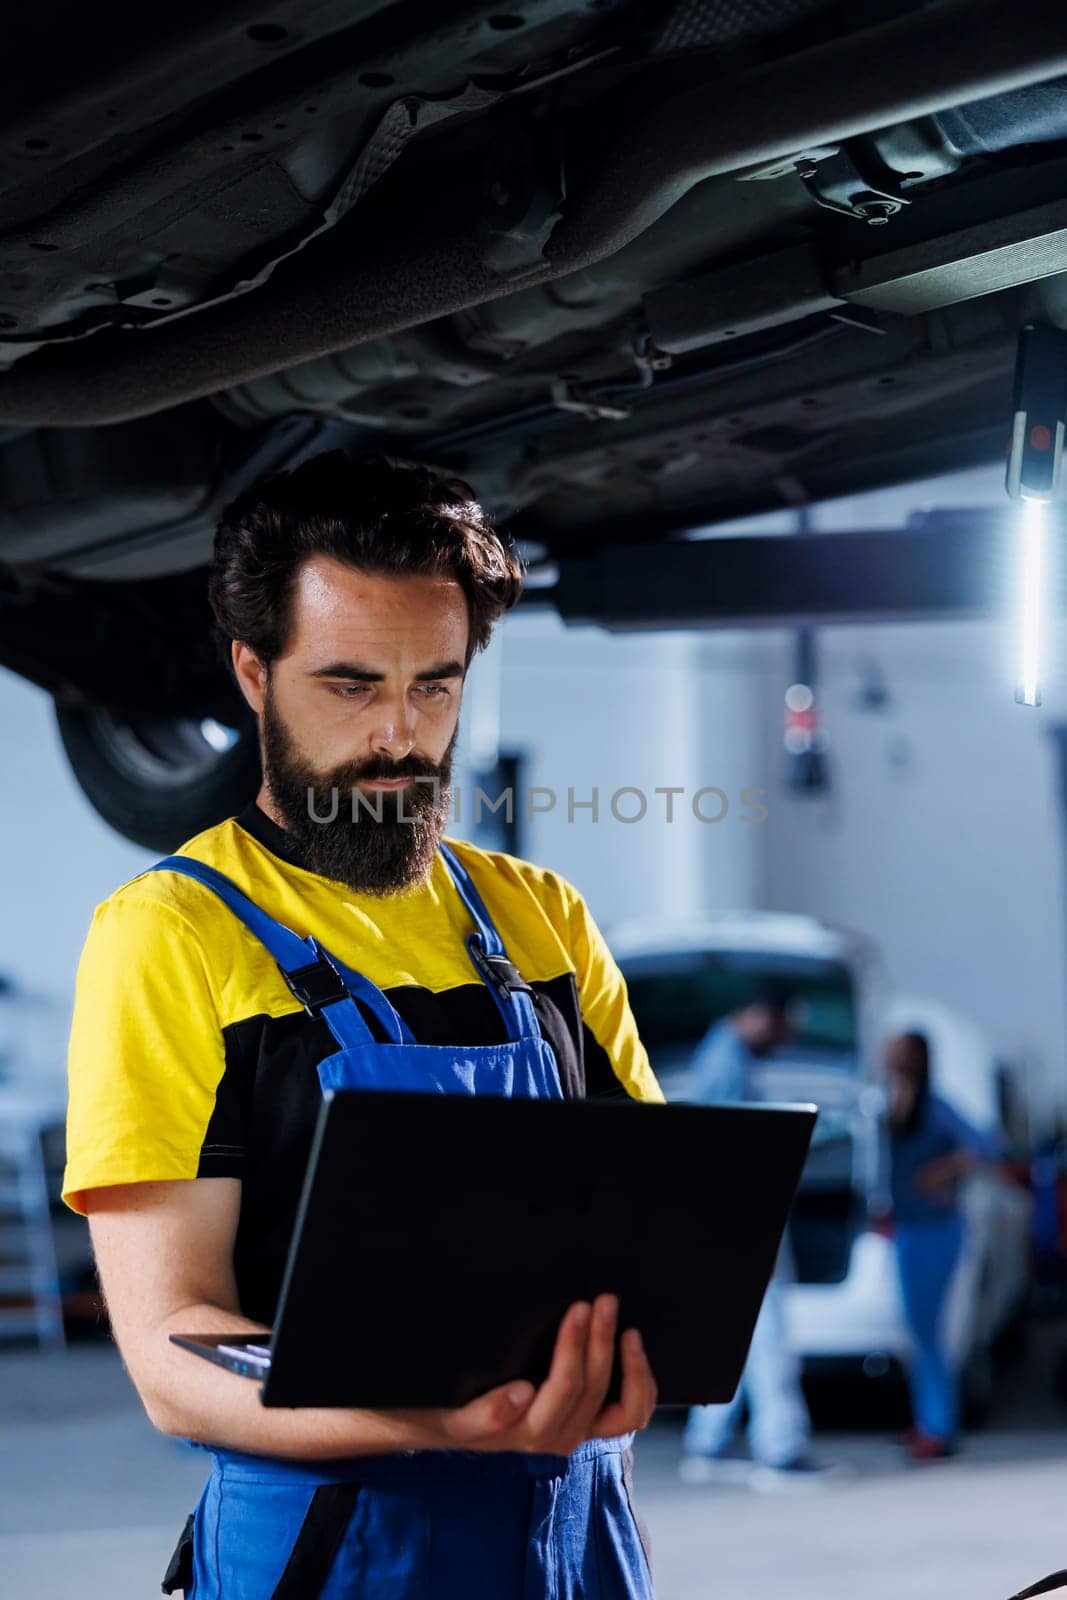 Diligent mechanic in garage using laptop to follow checklist while doing maintenance on car. Meticulous employee in auto repair shop does checkup on vehicle helped by device